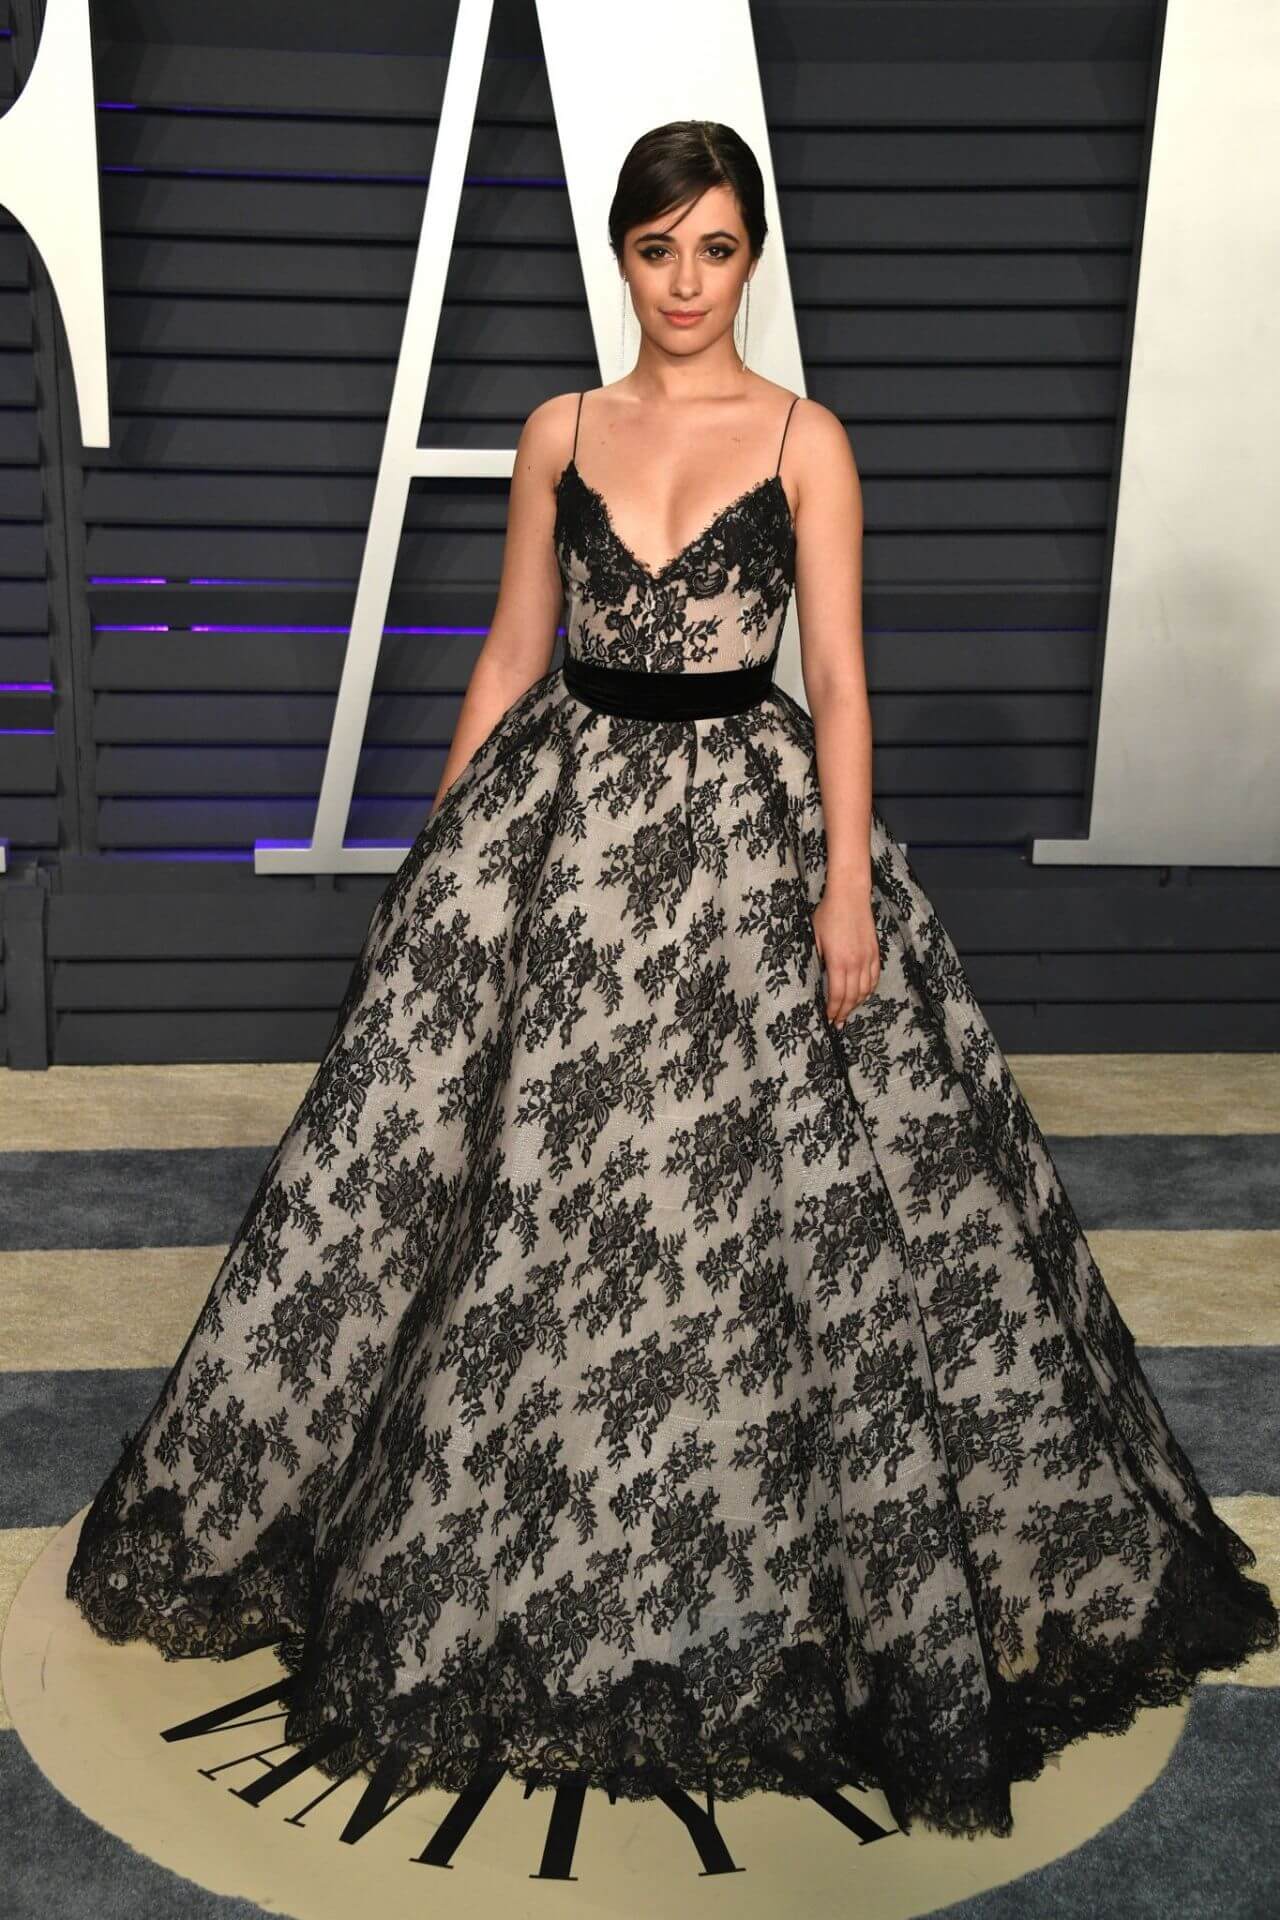 Camila Cabello In Black V Neck Strap Sleeves Ball Gown Dress At Vanity Fair Oscar Party